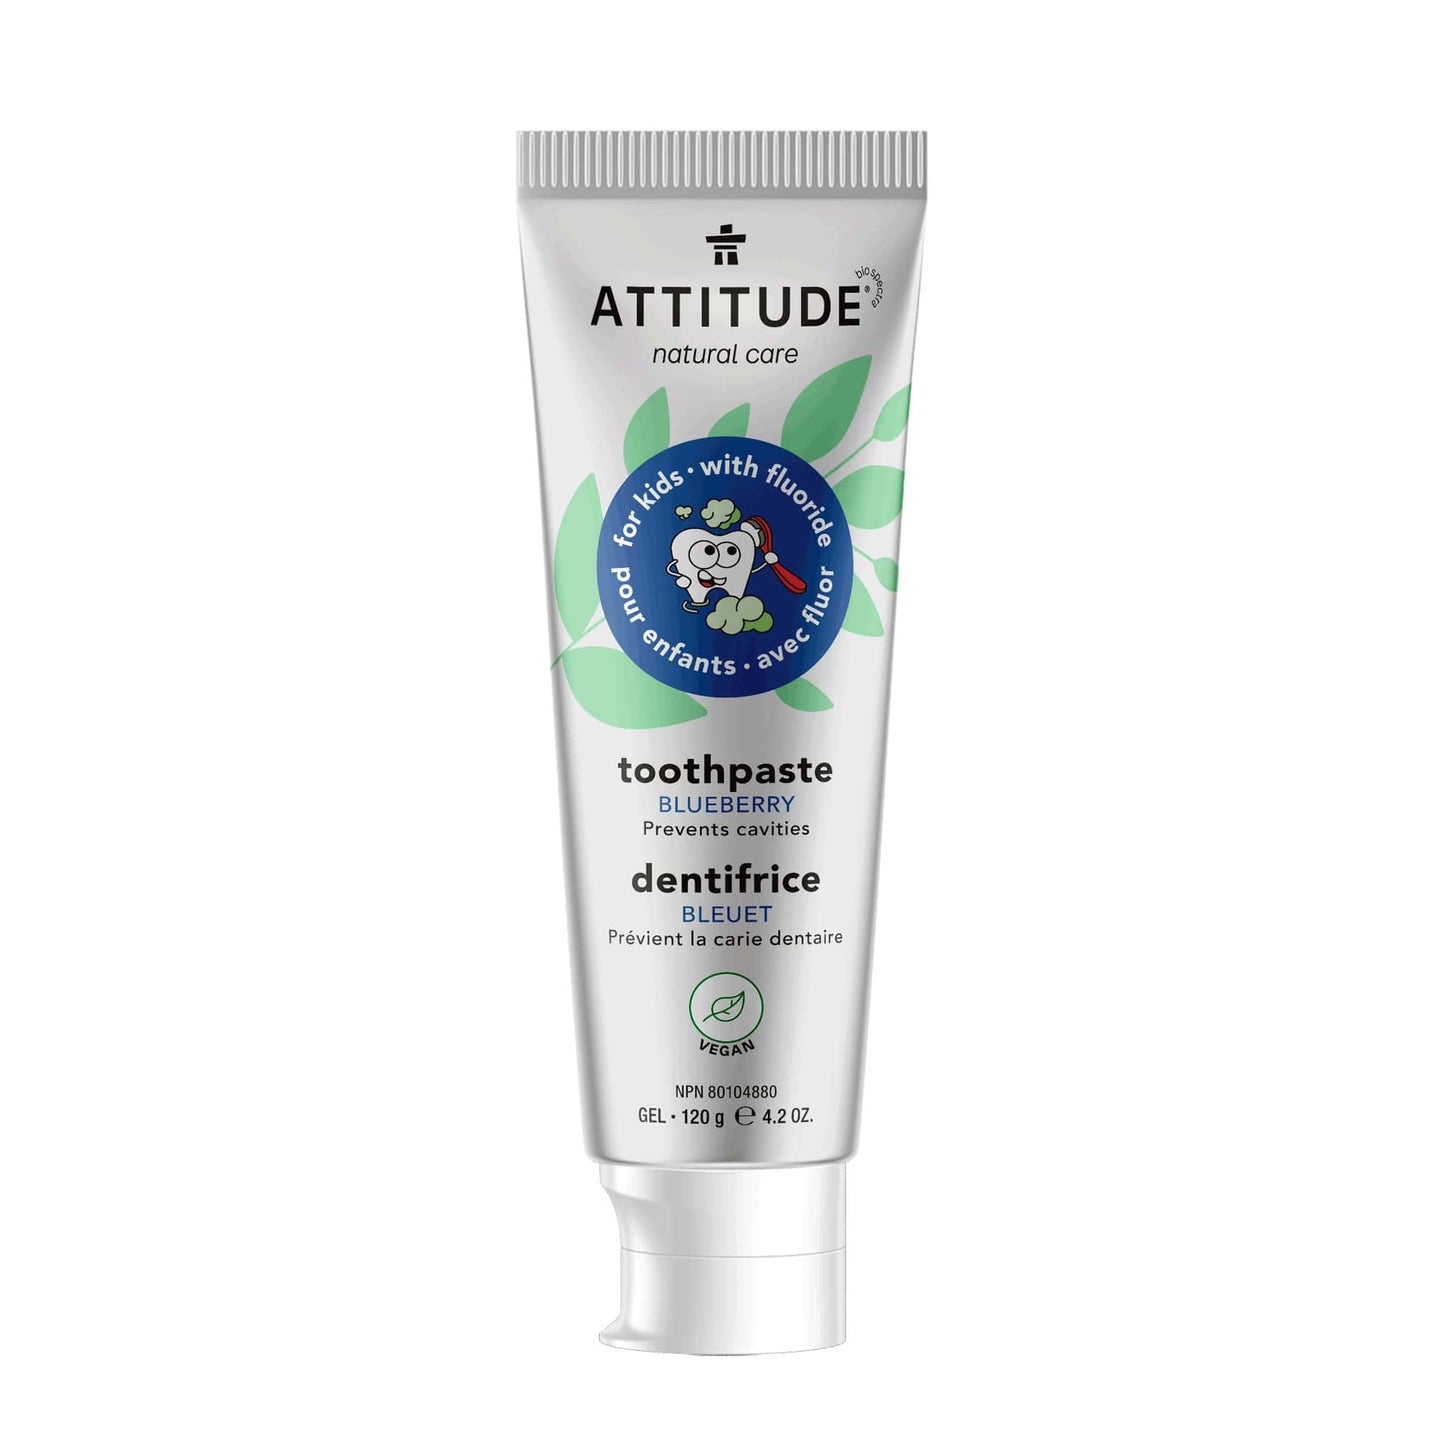 ATTITUDE Toothpaste with fluor for kids - Blueberry_en?_main? 120g Blueberry